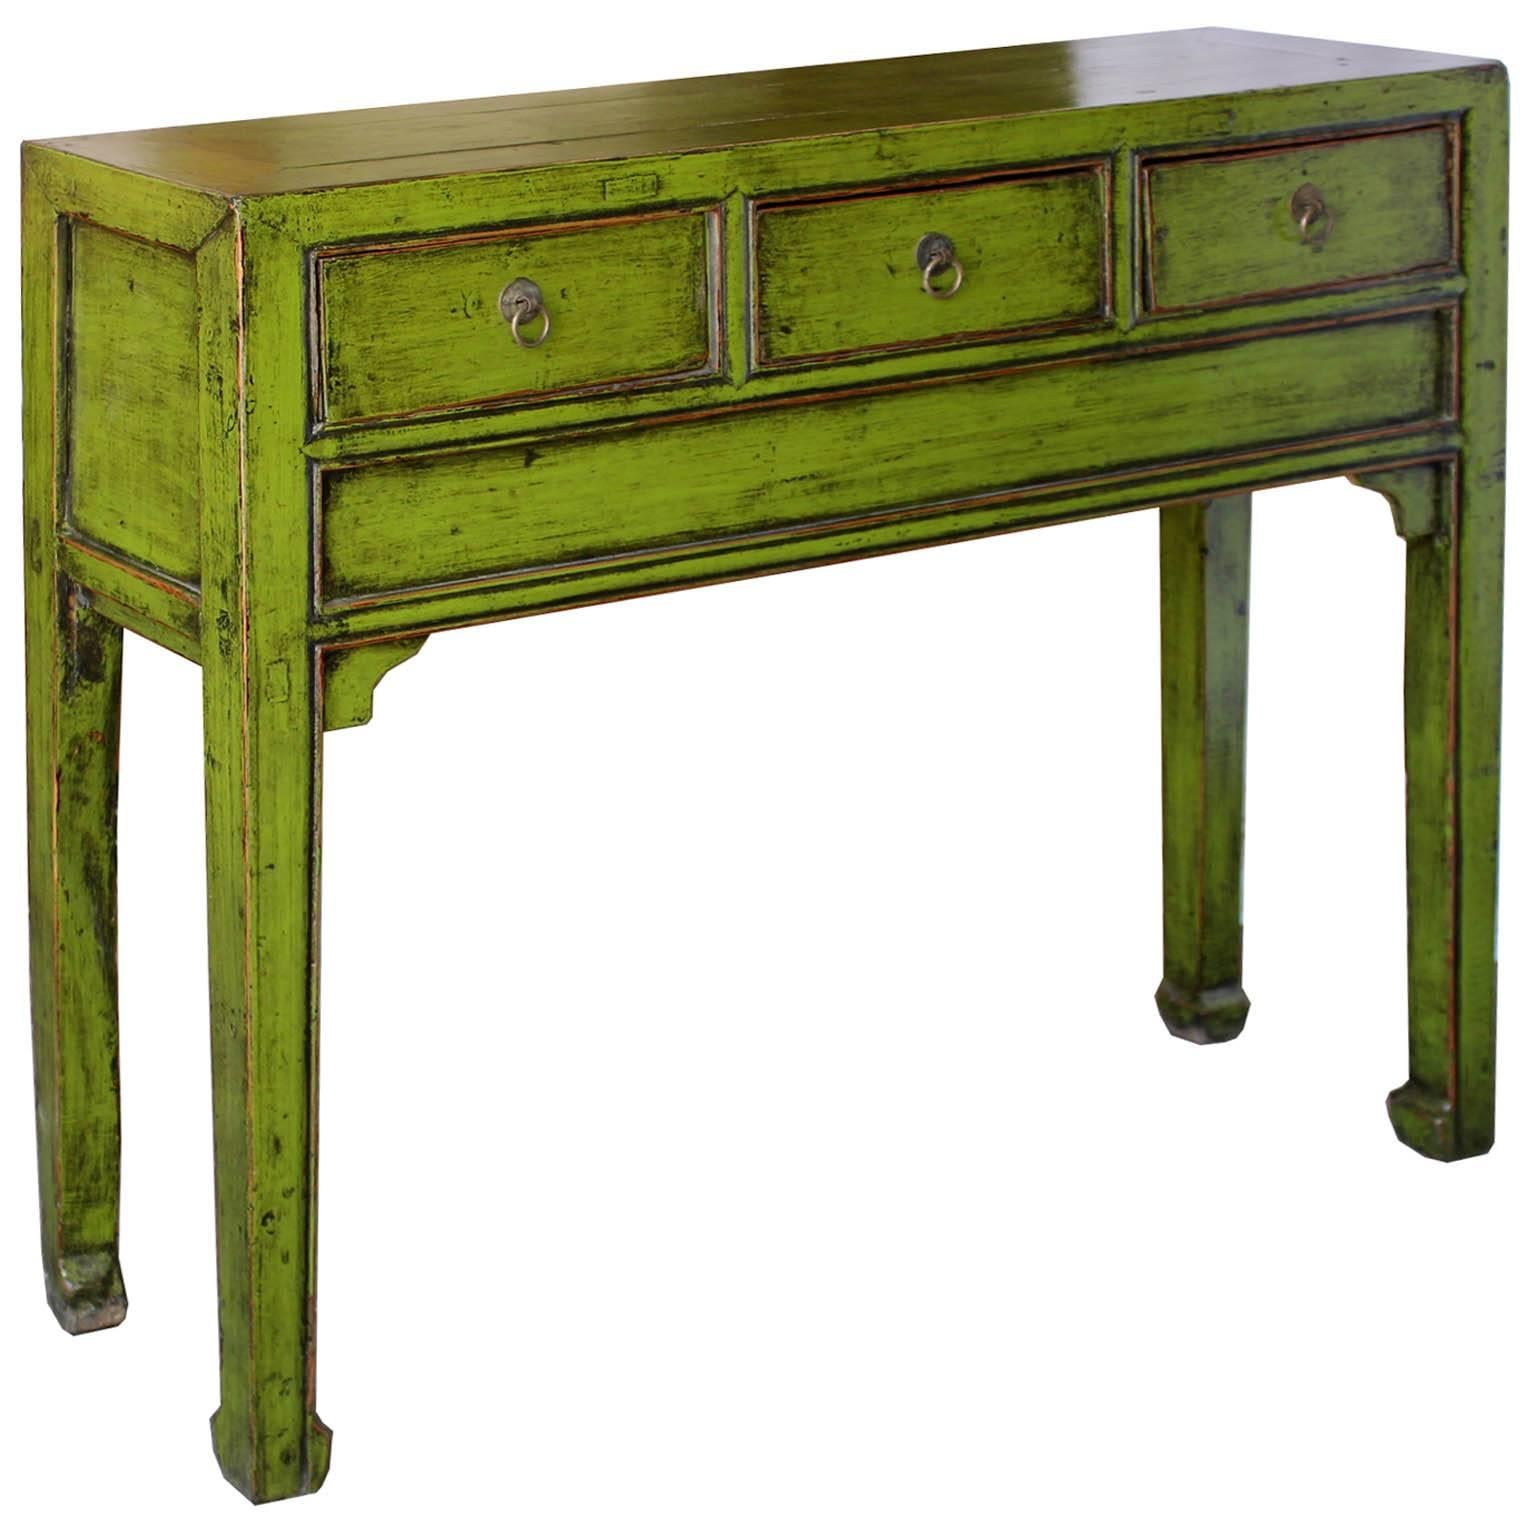 Lime green console table with three drawers, straight skirt and horse hoof-style feet. Use in an entry way or behind a sofa for a pop of color in a contemporary interior.